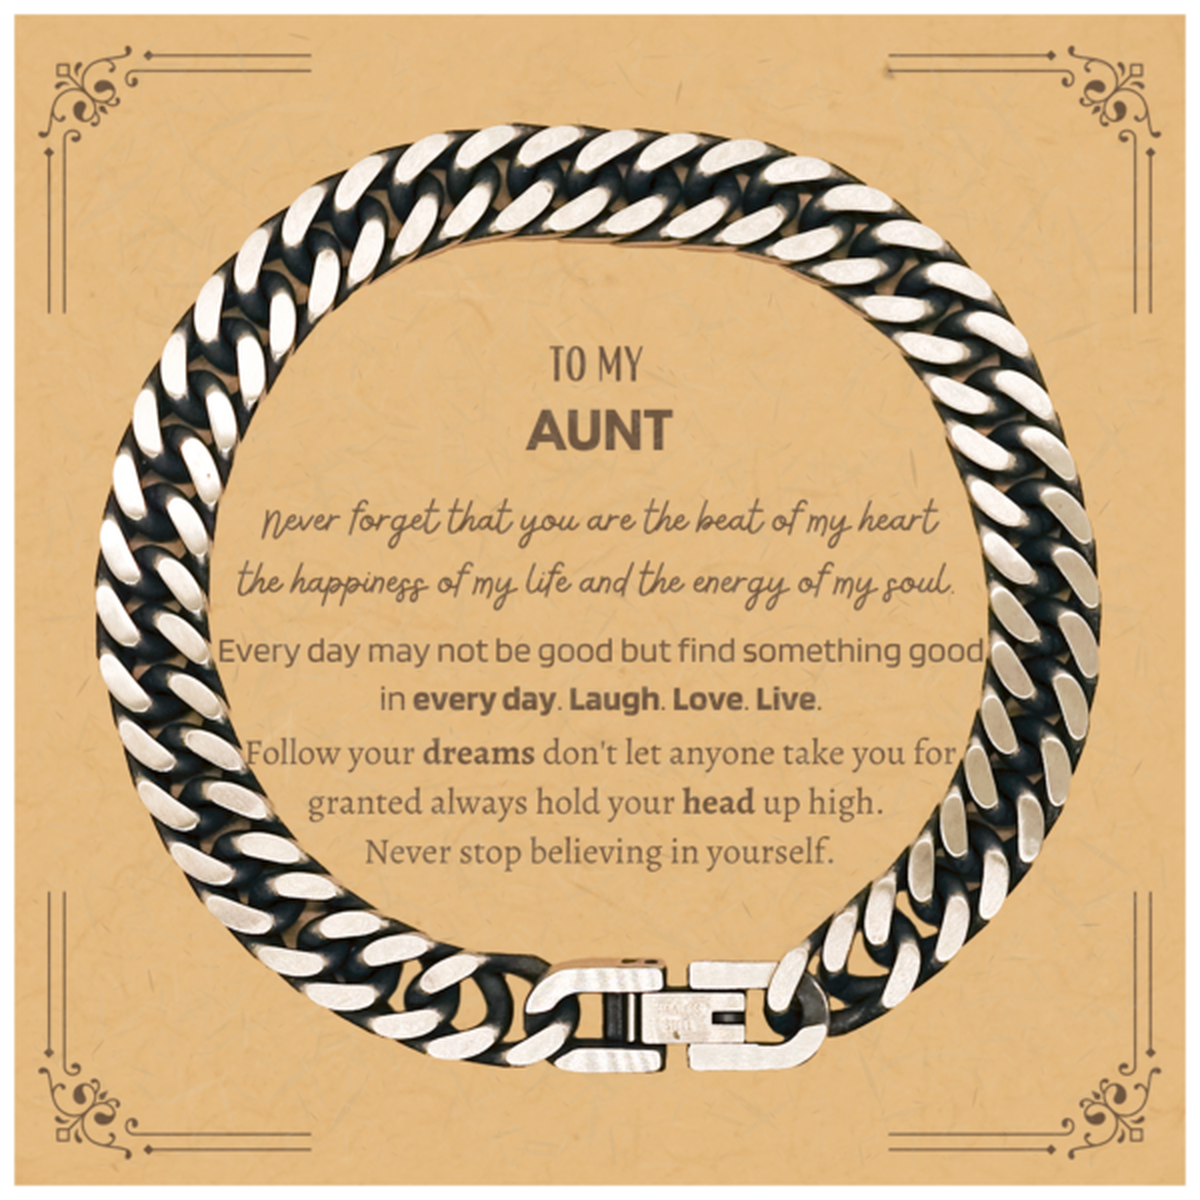 To My Aunt Message Card Gifts, Christmas Aunt Cuban Link Chain Bracelet Present, Birthday Unique Motivational For Aunt, To My Aunt Never forget that you are the beat of my heart the happiness of my life and the energy of my soul